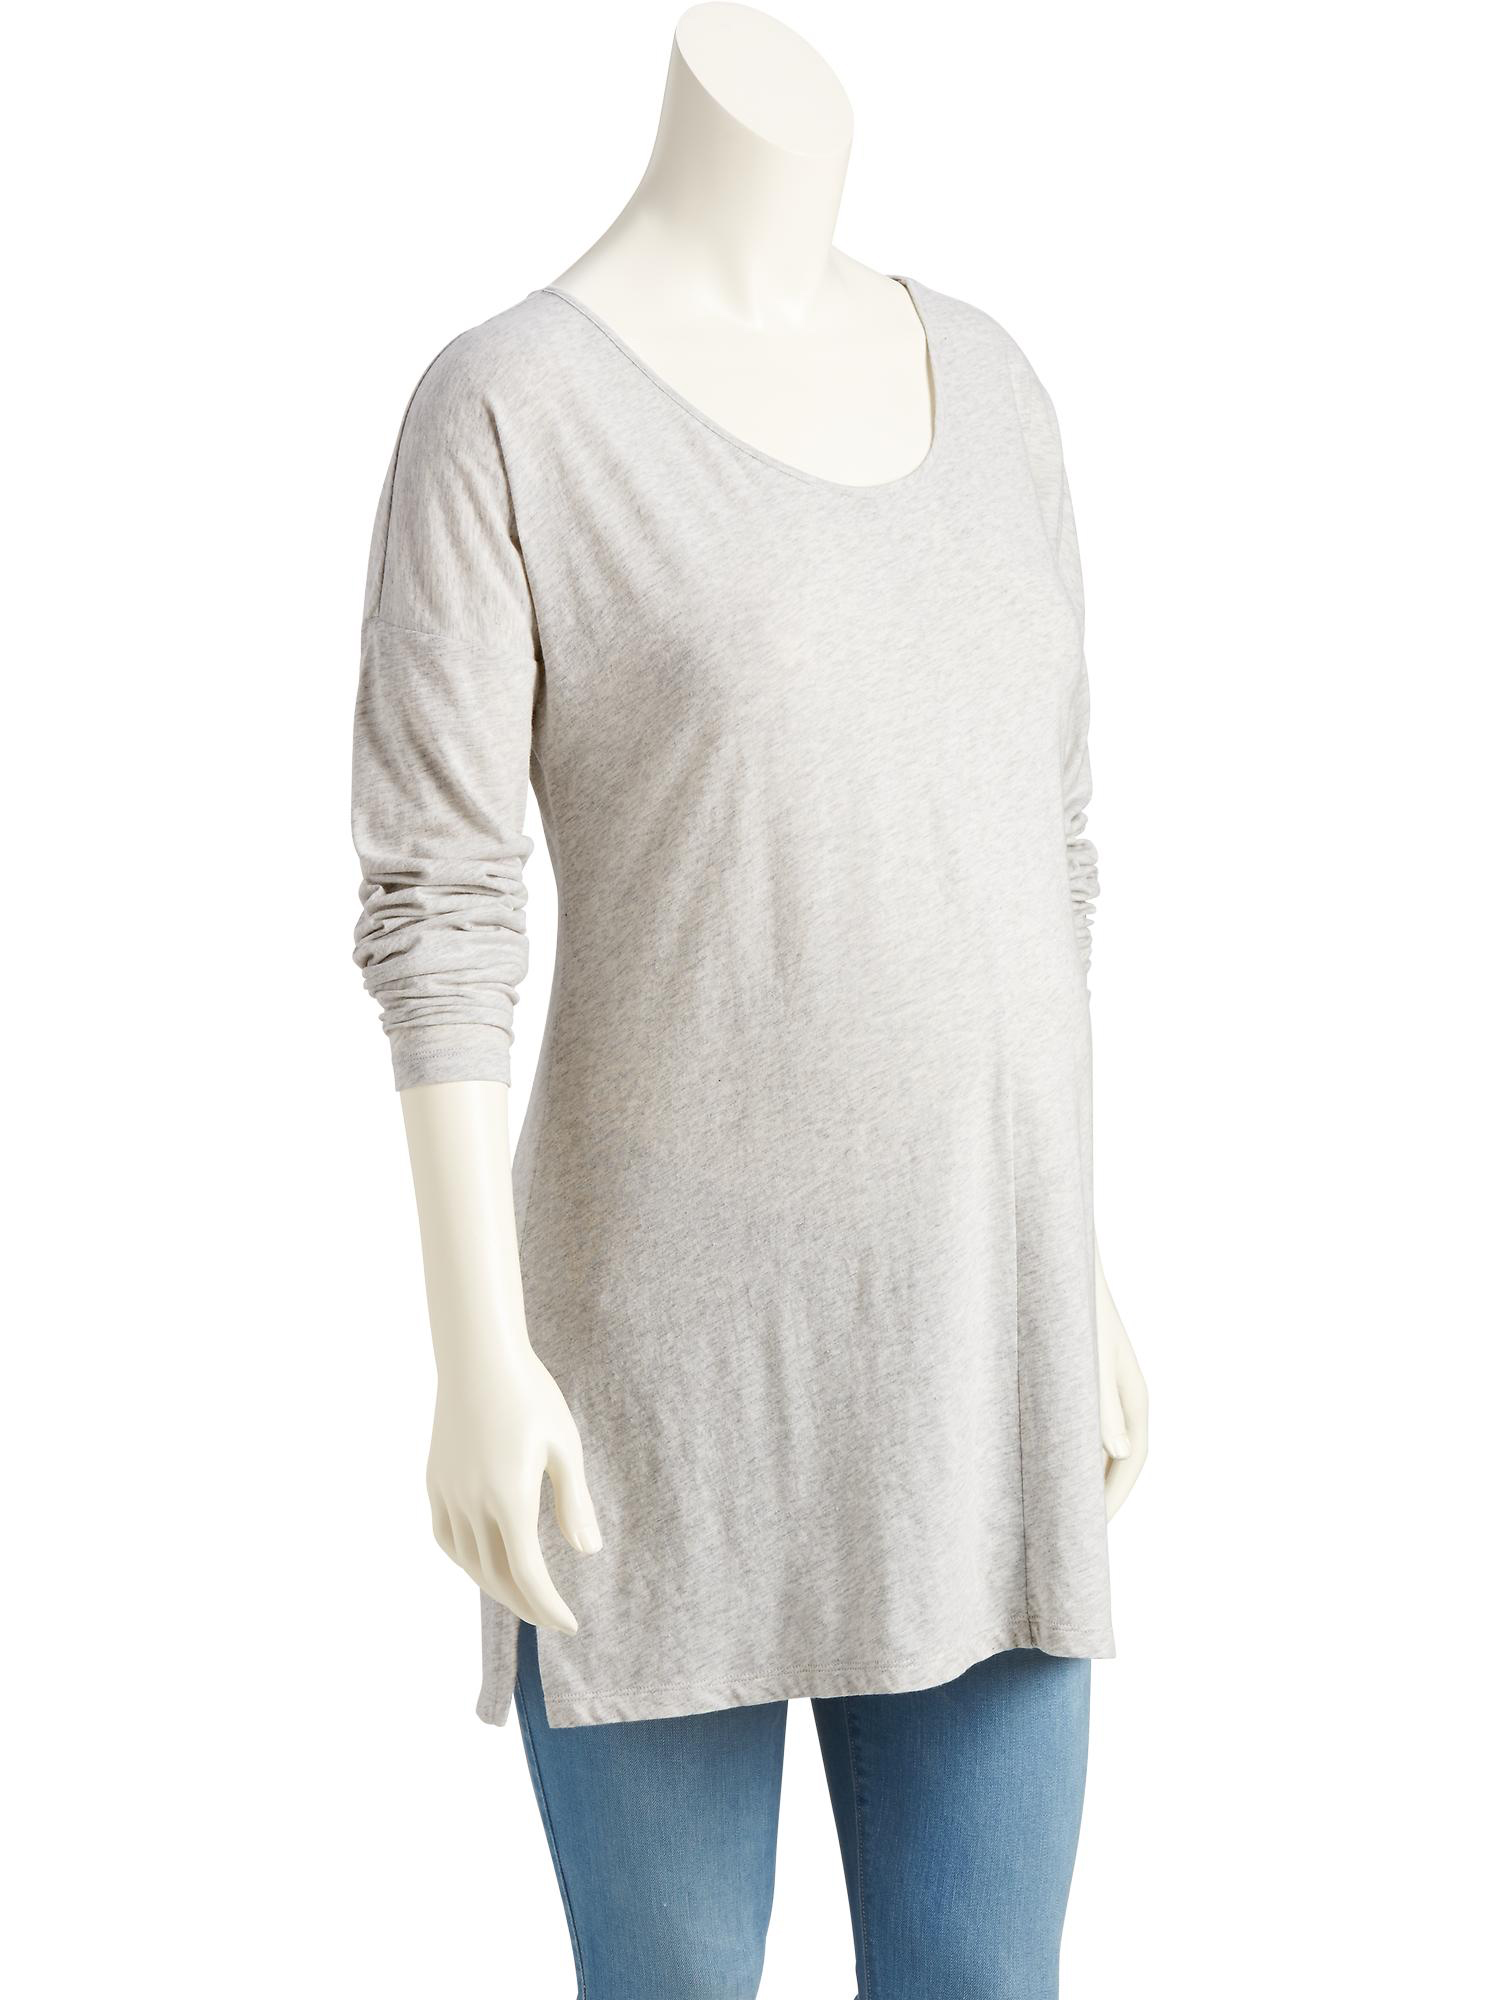 Maternity Drop-Shoulder Tunic from Old Navy